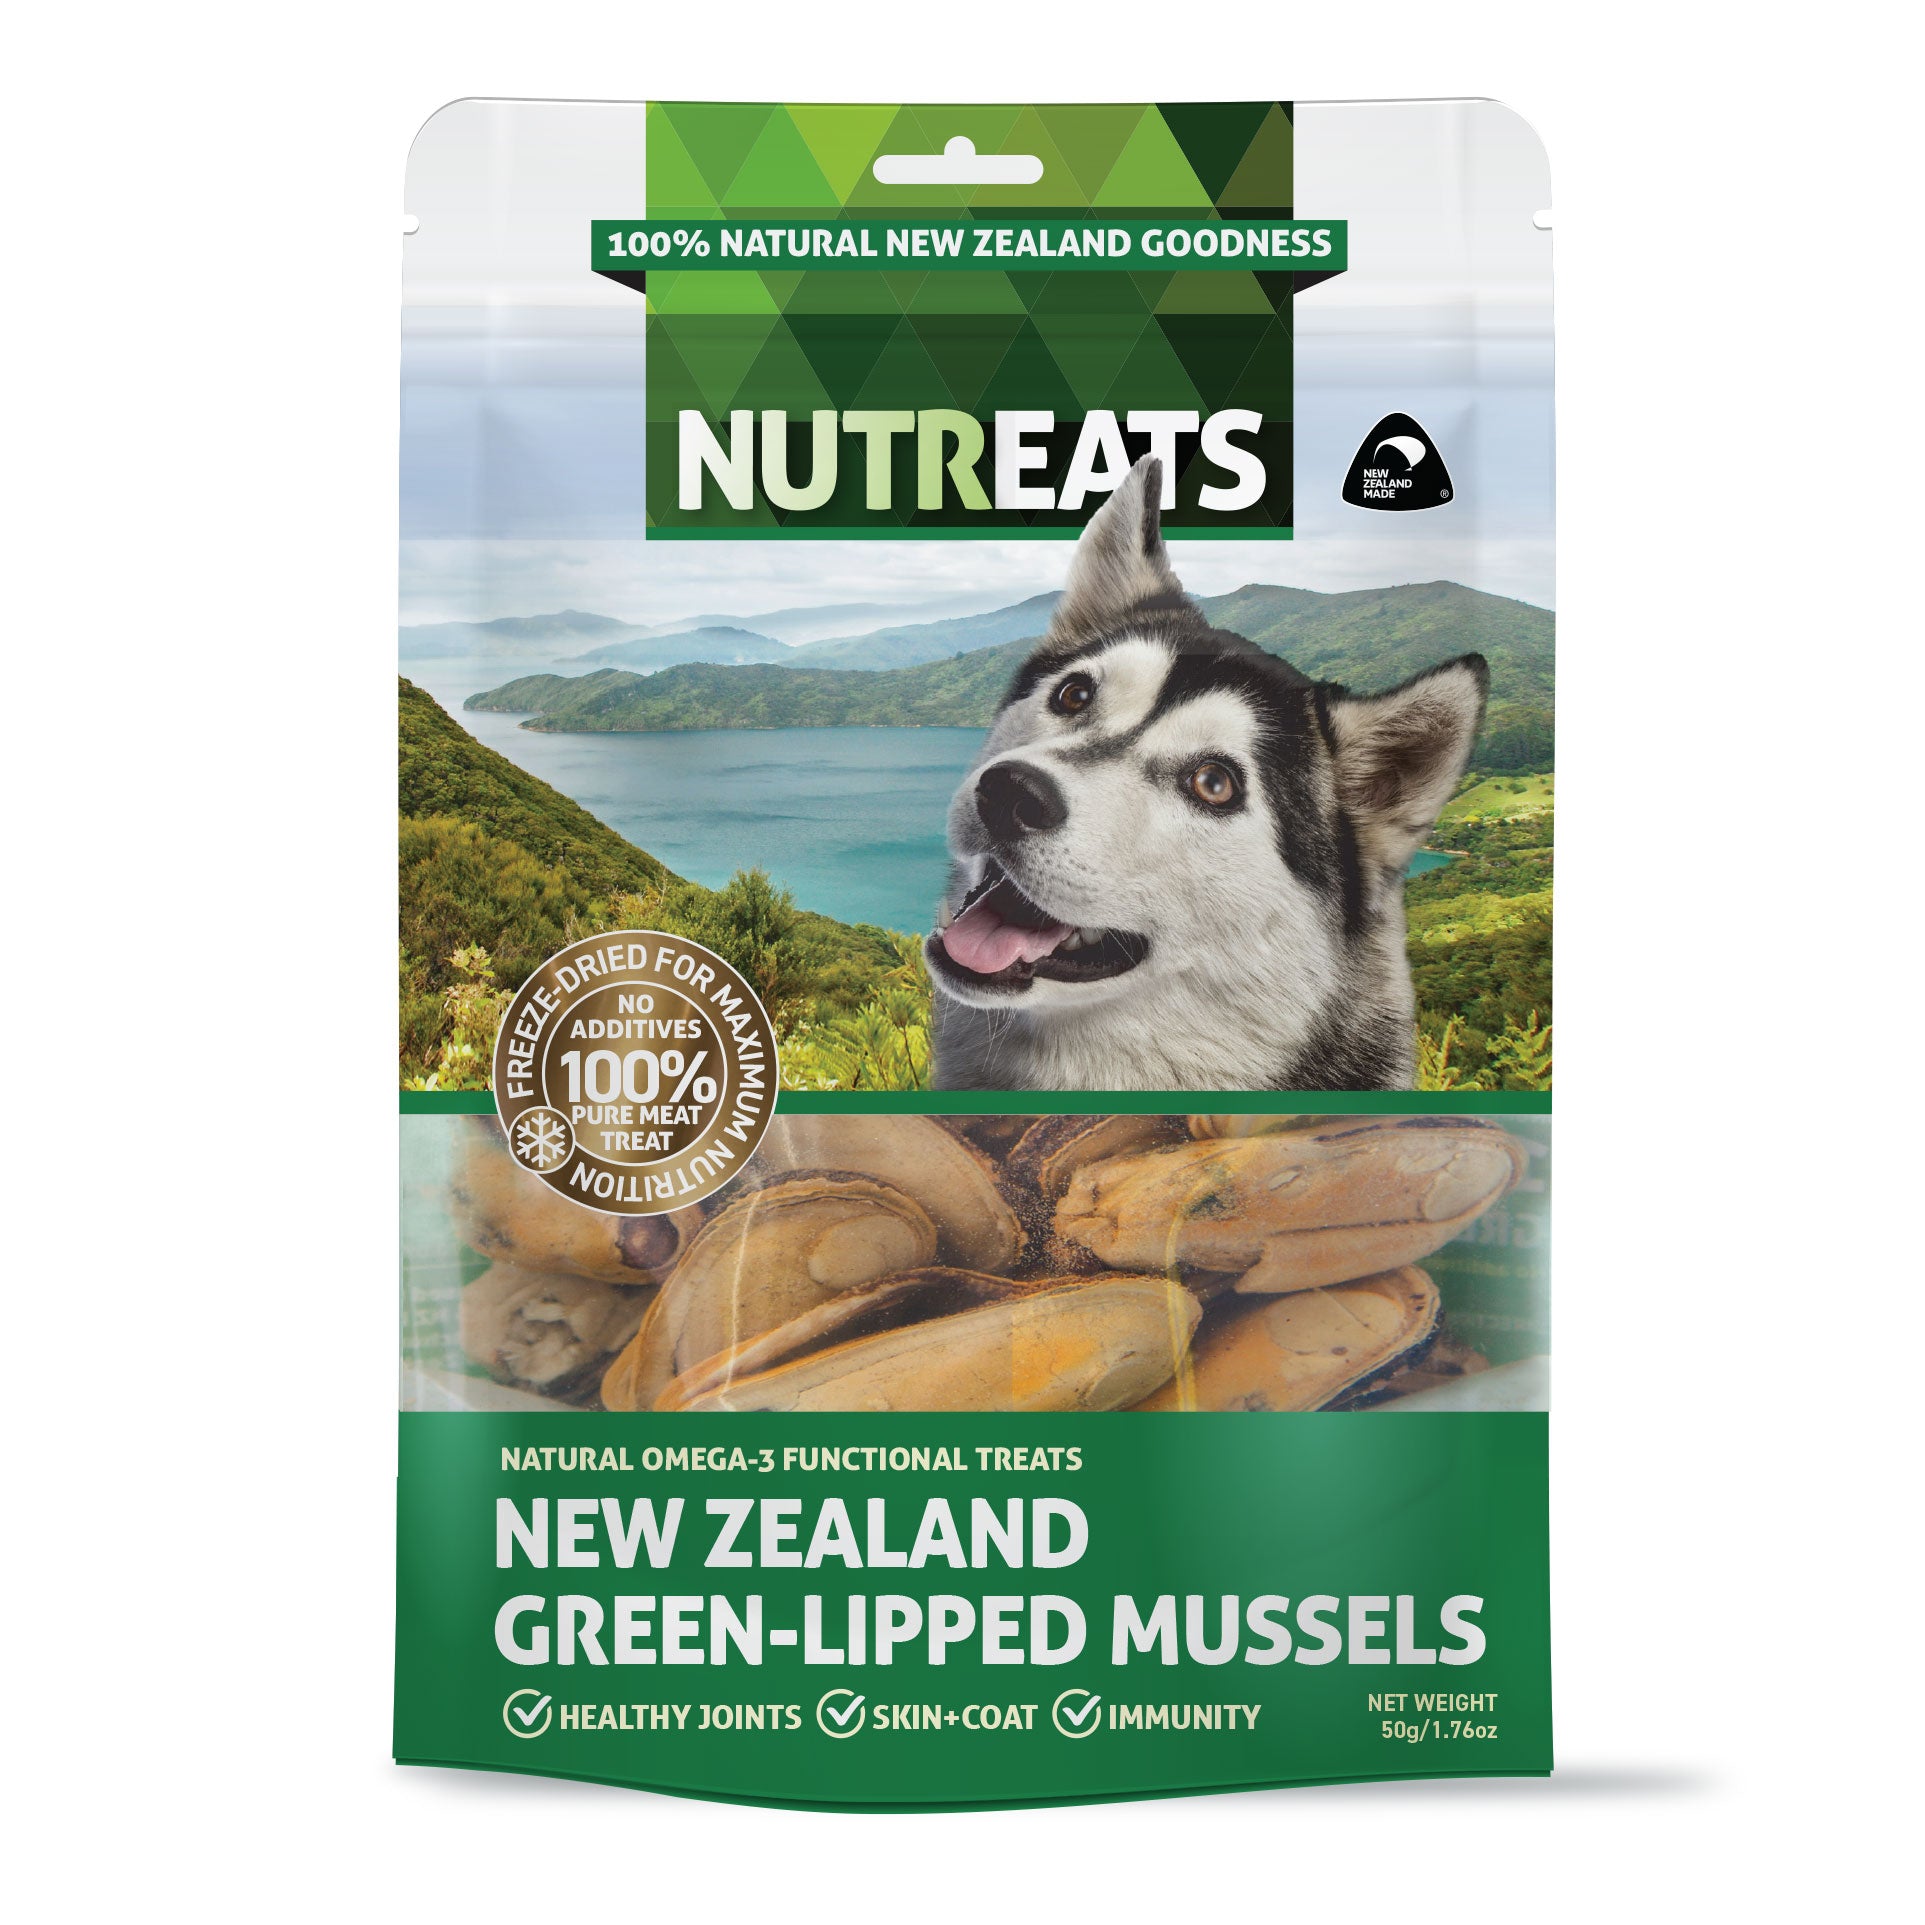 New Zealand Green-lipped mussels. Freeze-dried and 100% natural. Great for supporting healthy joints, ski and glossy coat and may help support immunity. Natural Omega-3 functional treats for dogs. New Zealand green-lipped mussel treats for dogs.